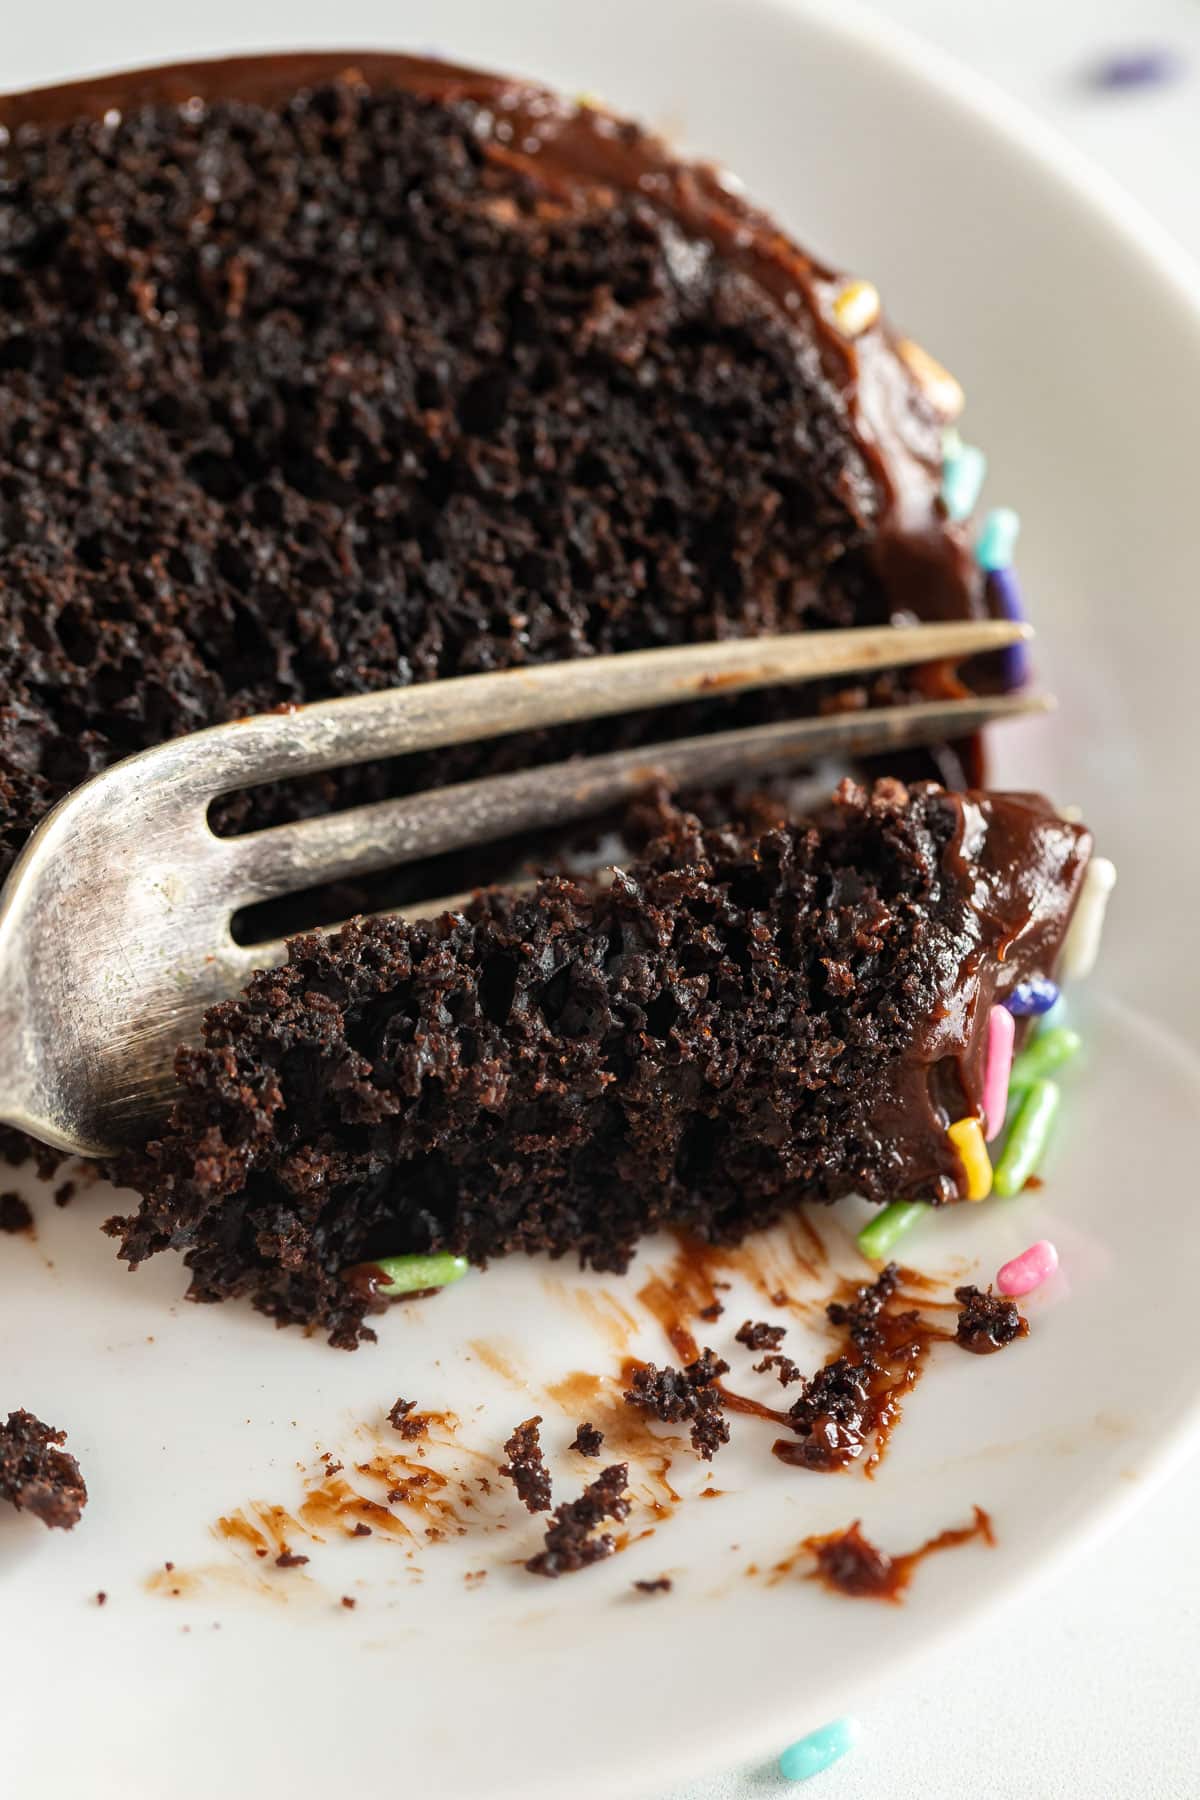 A close up of a fork cutting a bite of a slice of chocolate cake.